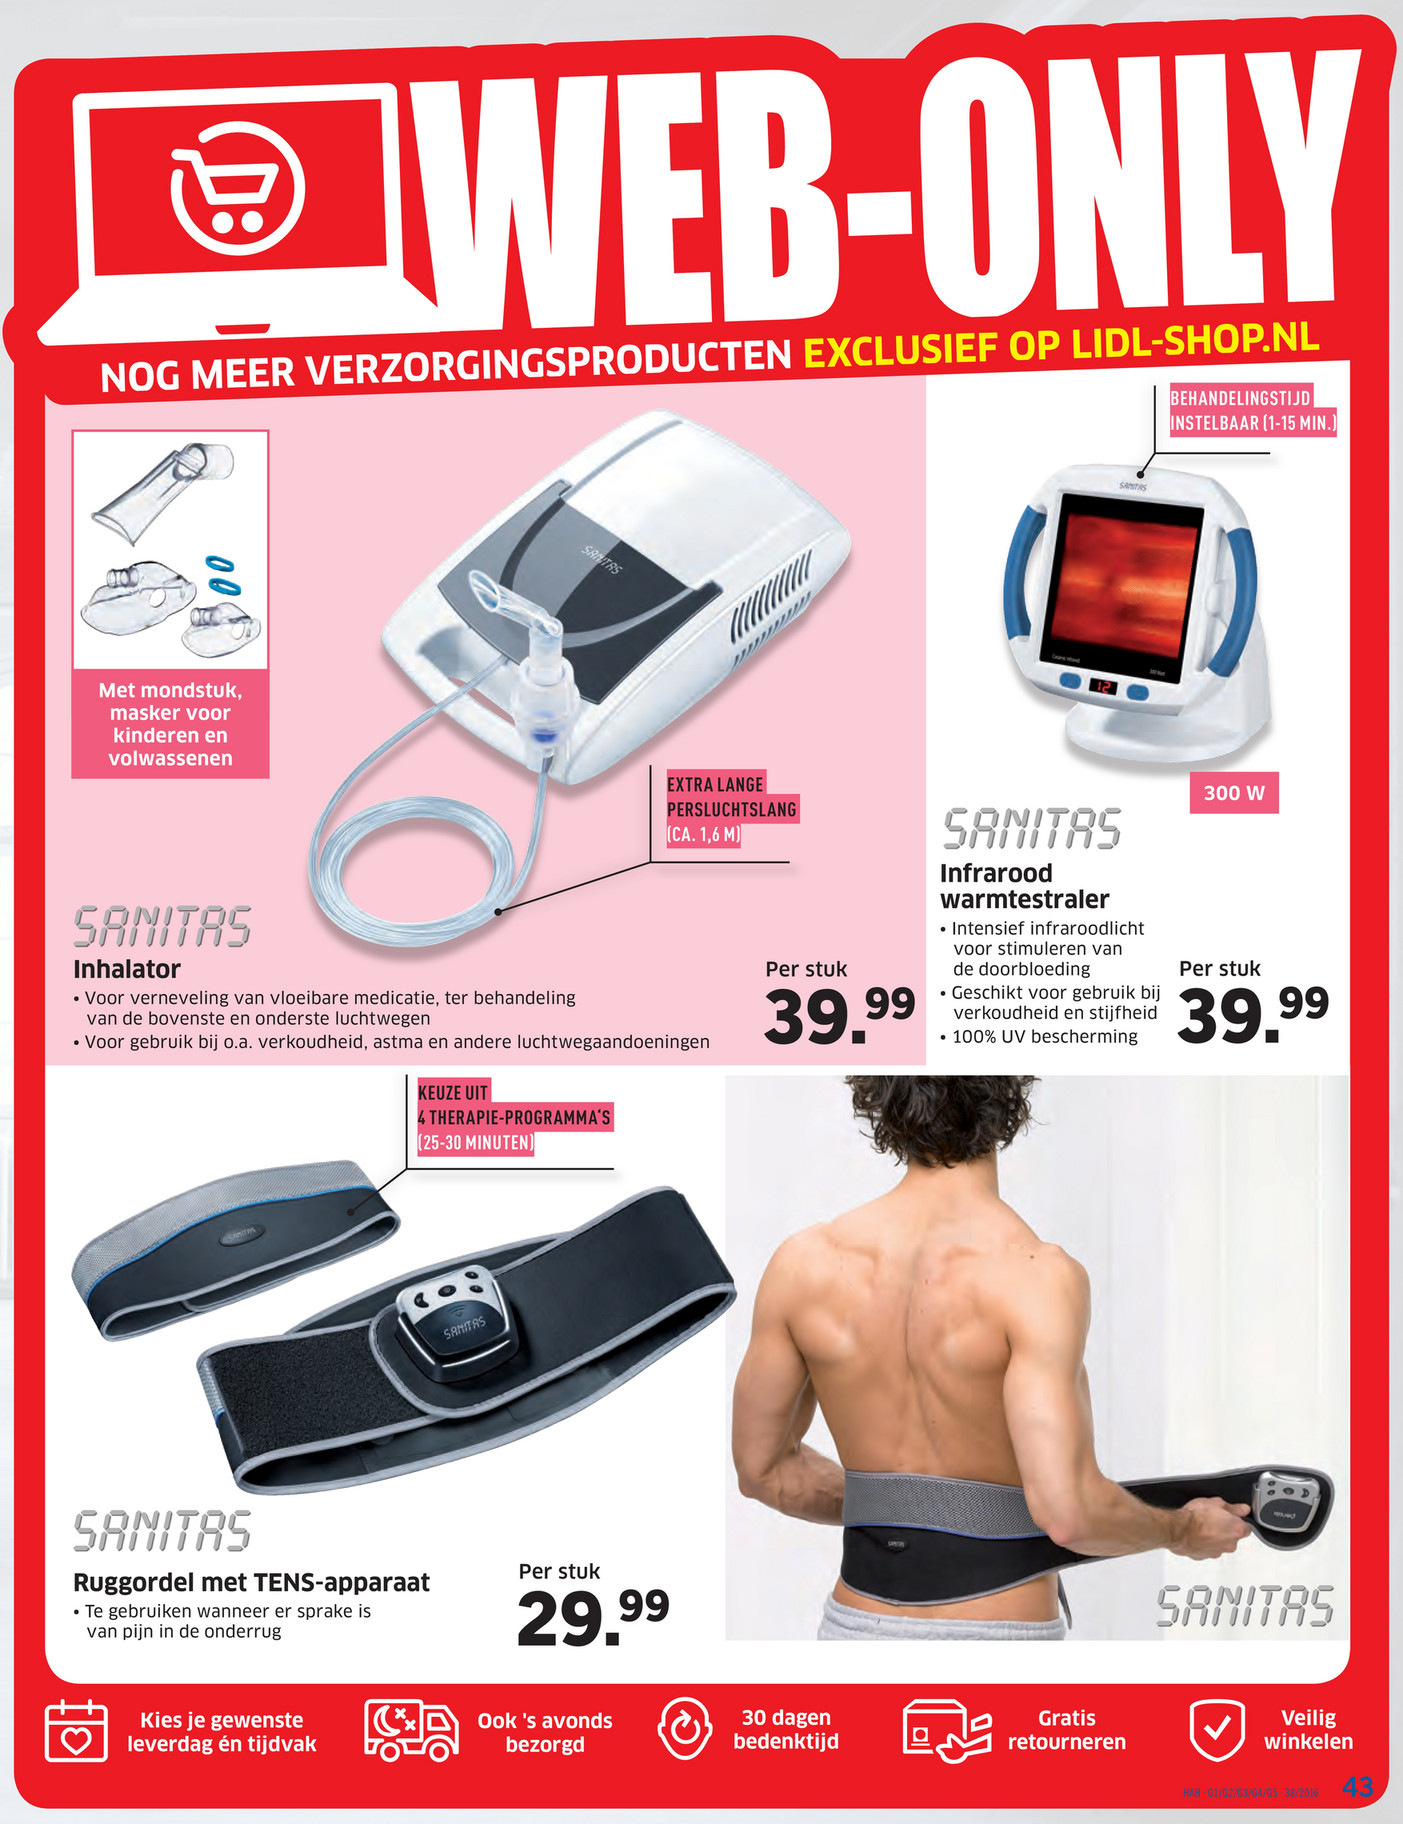 Reclame-nu.nl - lidl-week38-16-r5 - Page 44-45 - Created with